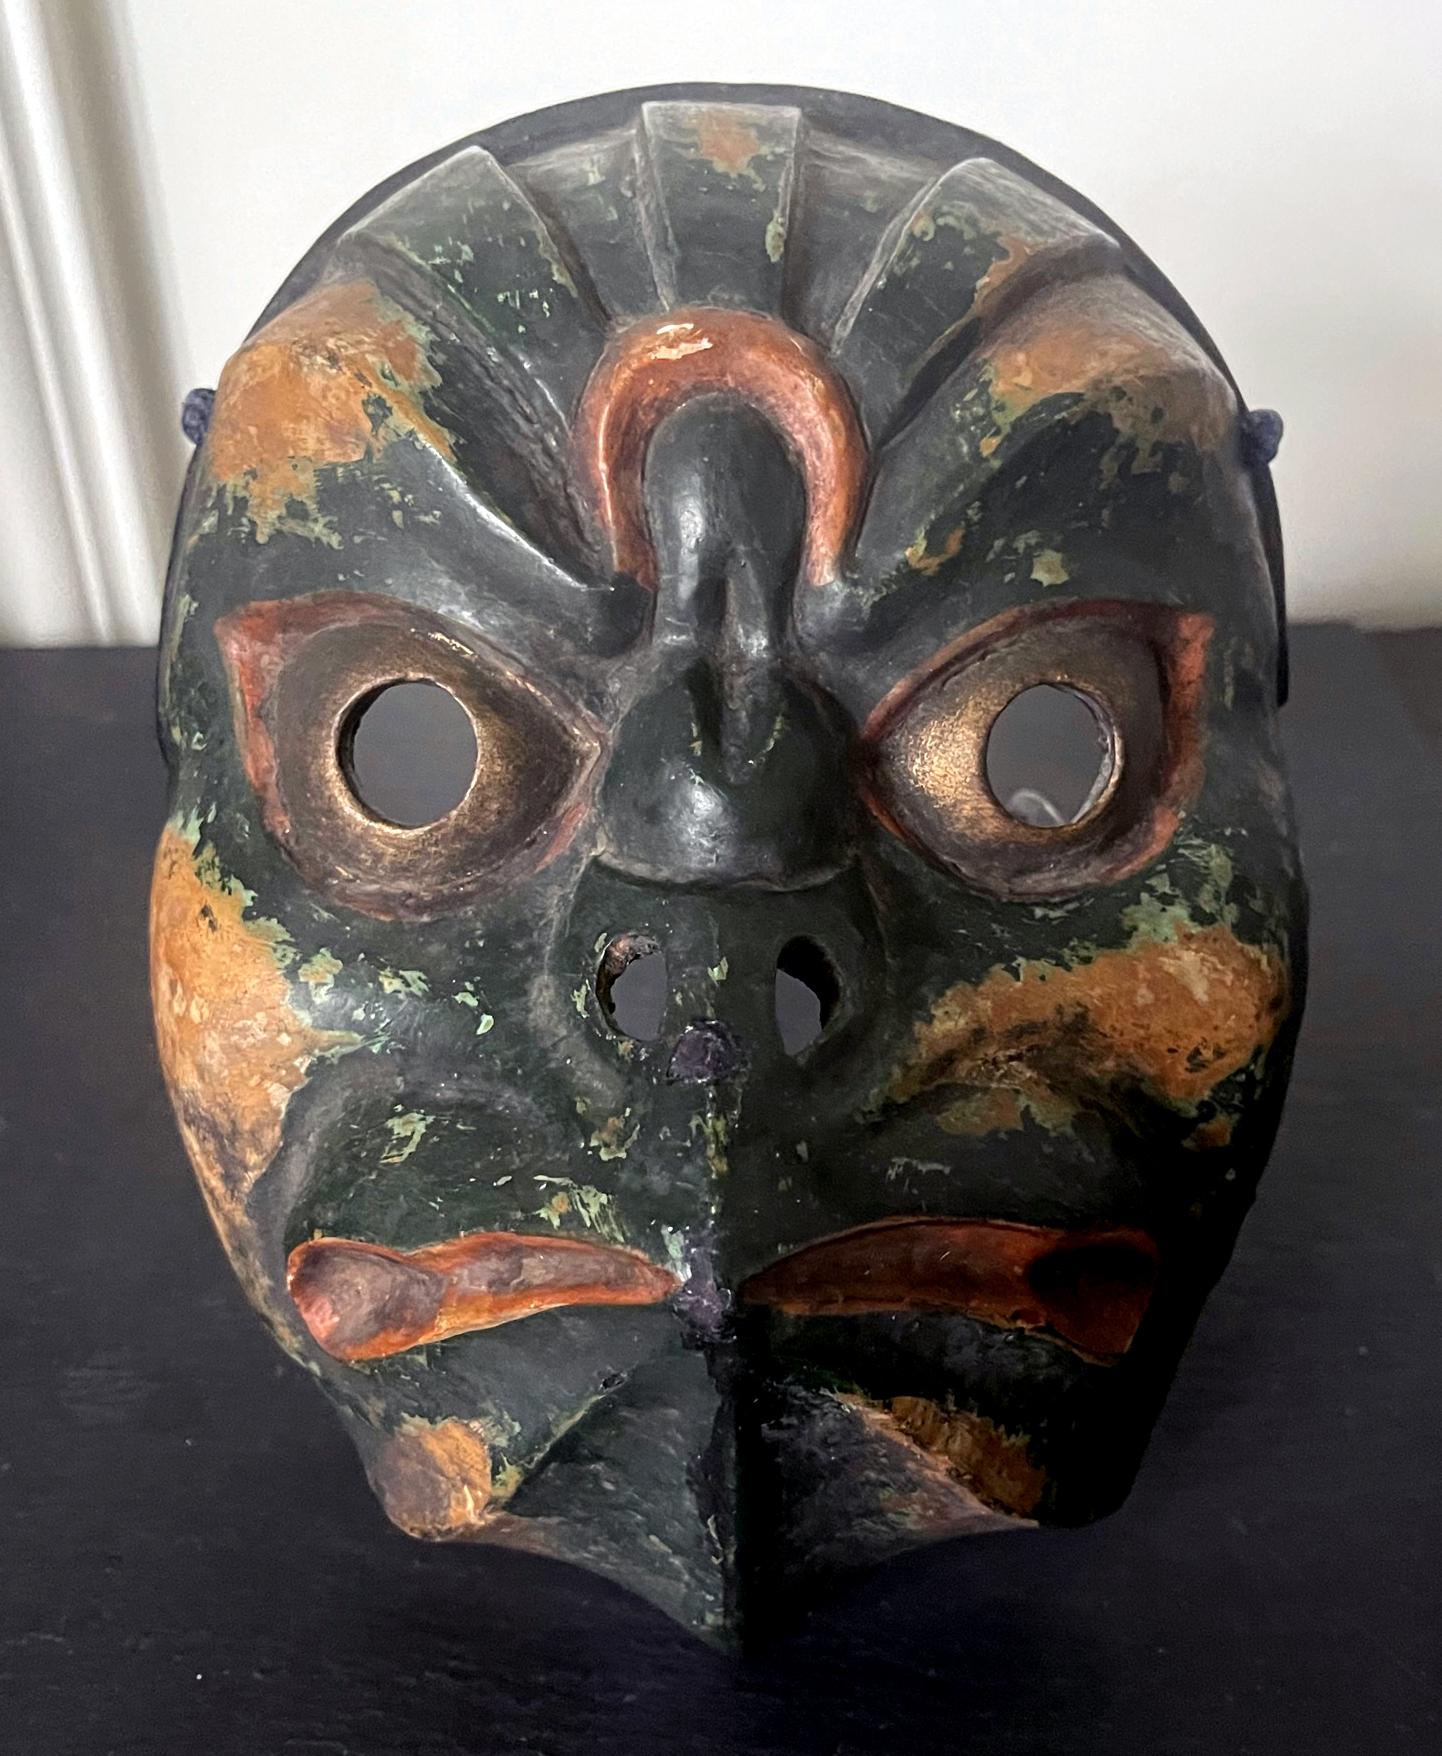 A striking Japanese carved wood mask with polychrome paint and lacquer surface. This rare mask is dated to the Edo period (first half of 19th century and possibly earlier). The mask was for Bugaku performance (a clandestine court dance reserved